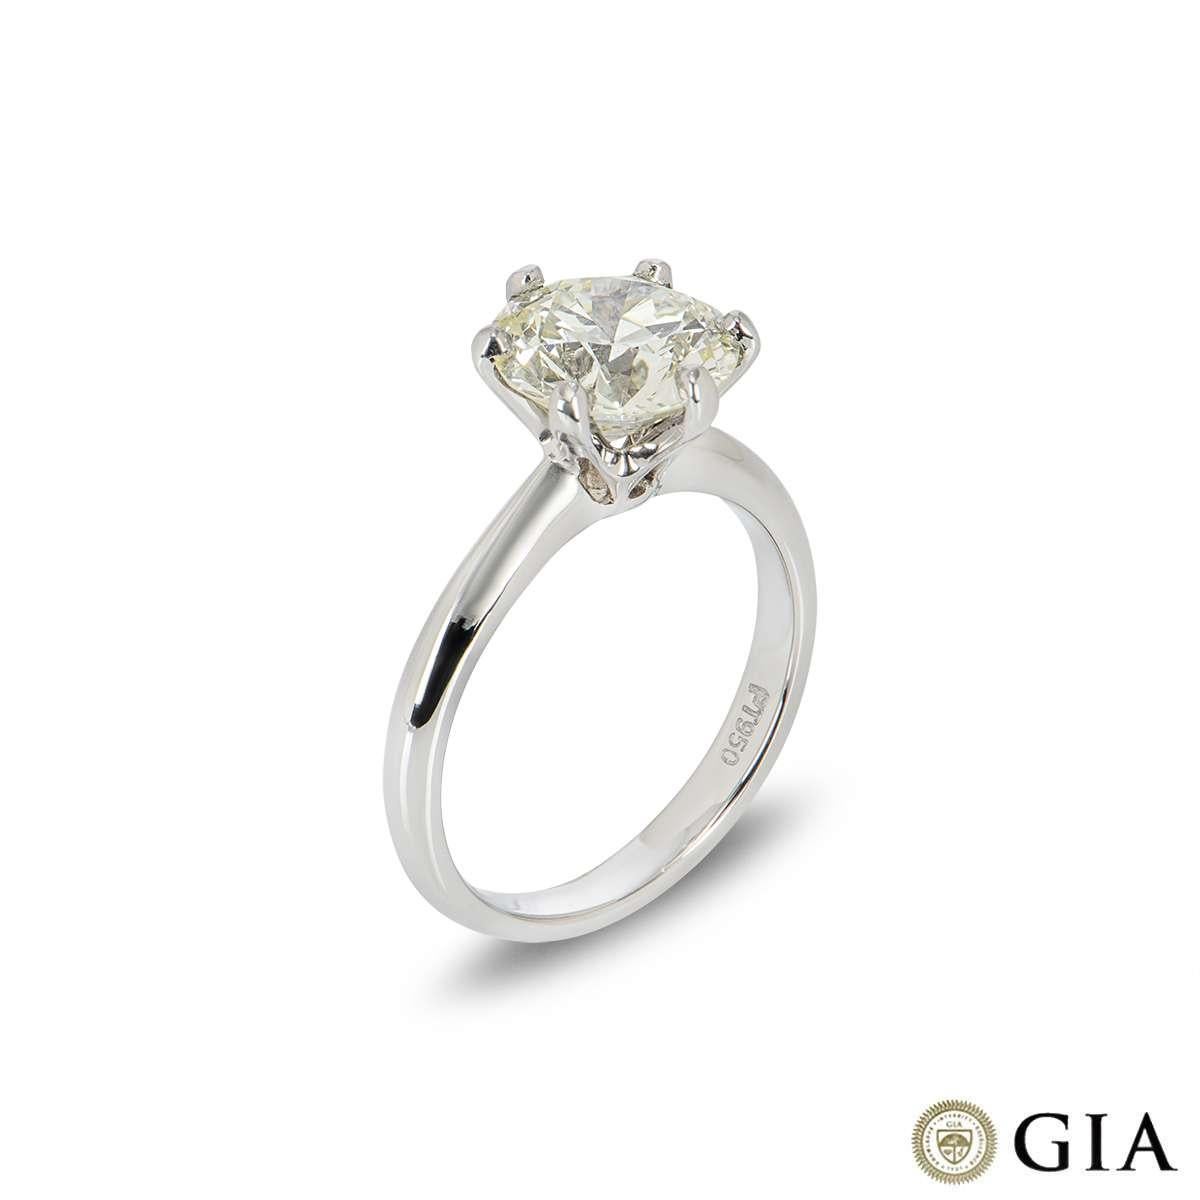 A single stone round brilliant cut diamond ring set in platinum. The 2.71ct round brilliant cut diamond is N colour and VS1 clarity. The single stone is set within a six claw platinum mount  which is currently a UK size M/ US size 6.25/ EU size 52